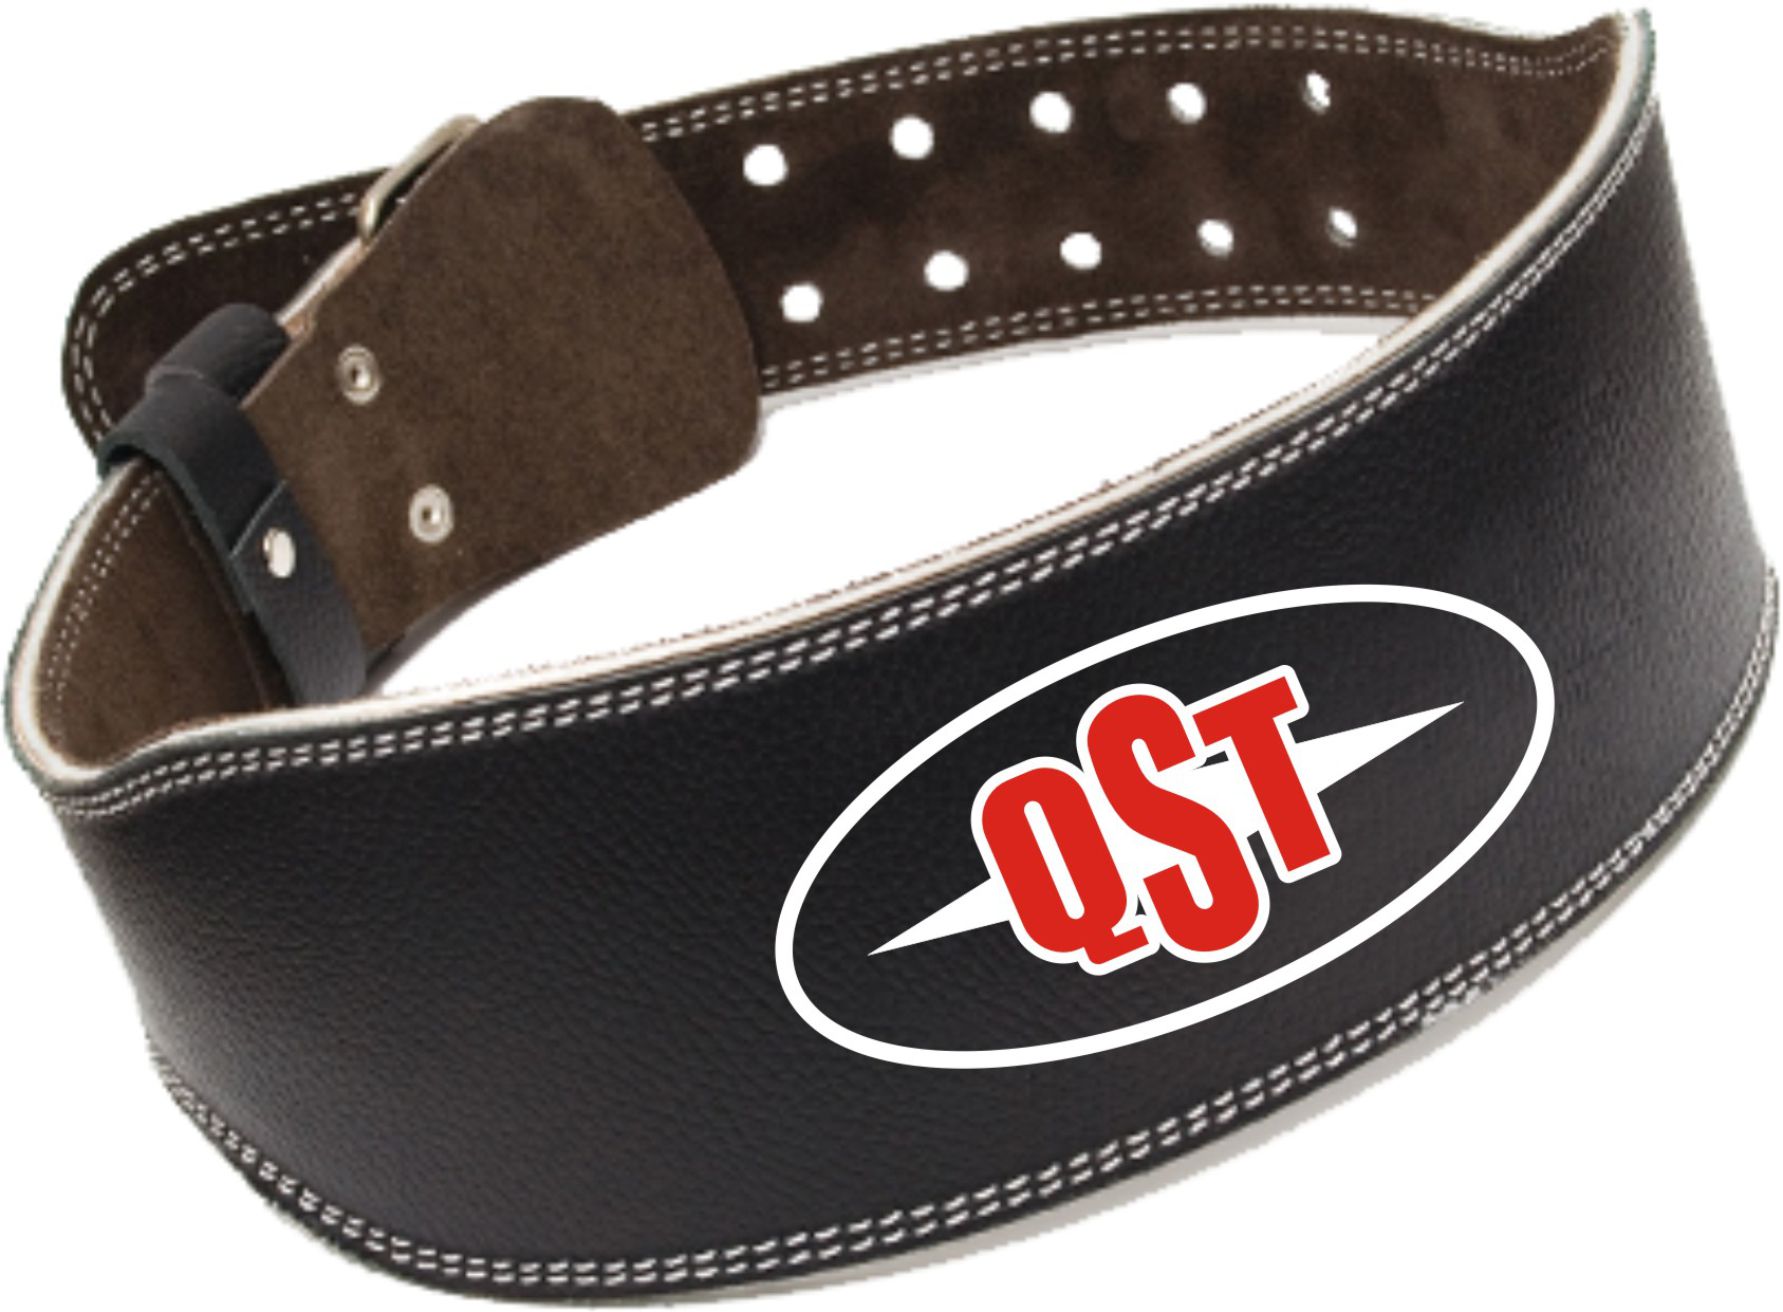 Leather Weightlifting Belt - ACS-1546